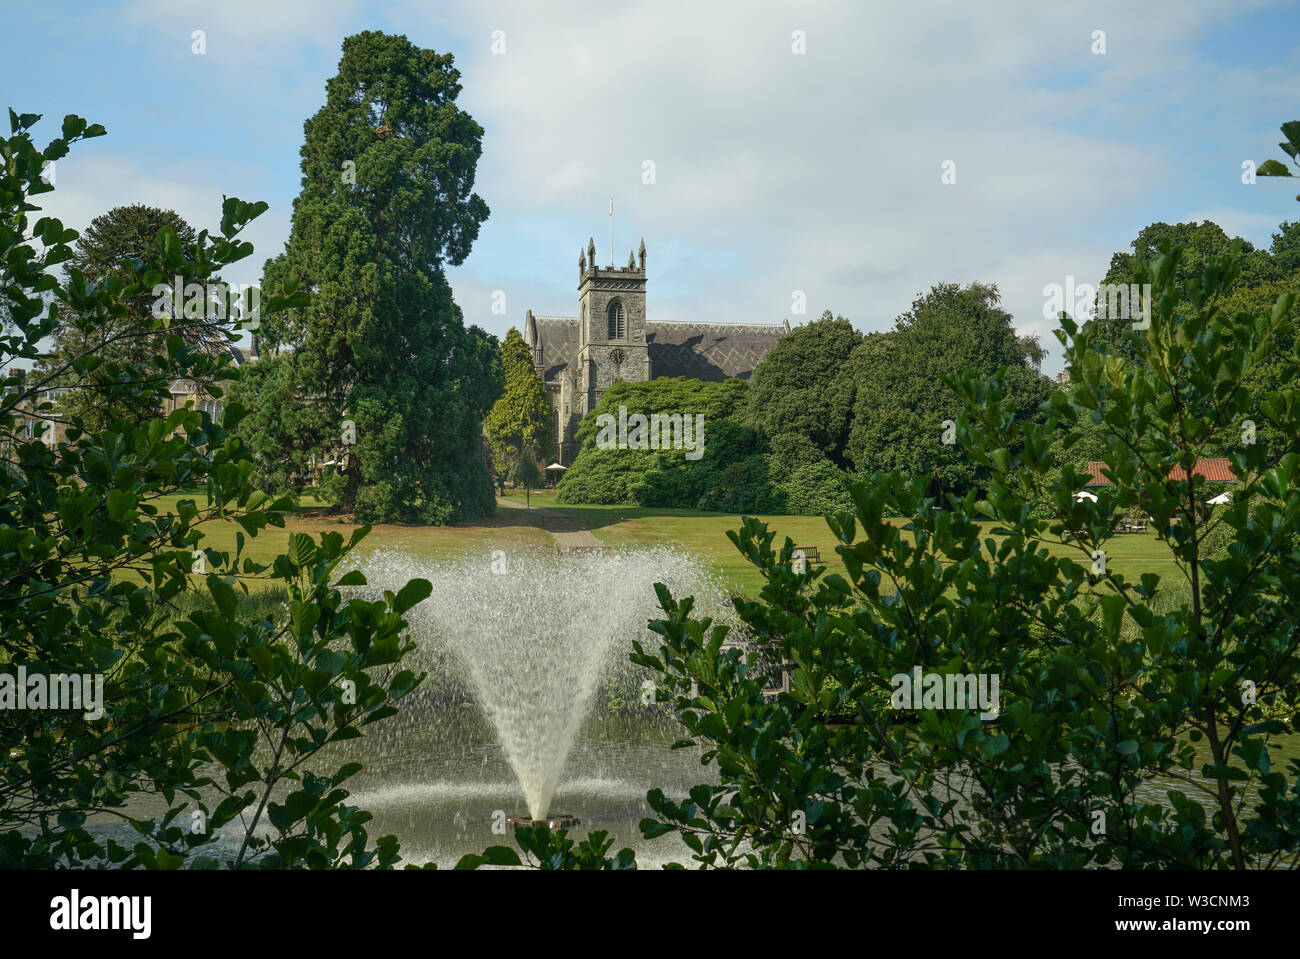 The Church of Our Lady and St Richard, Ashdown Park & Country Club, Wych Cross, East Sussex -1 Stock Photo